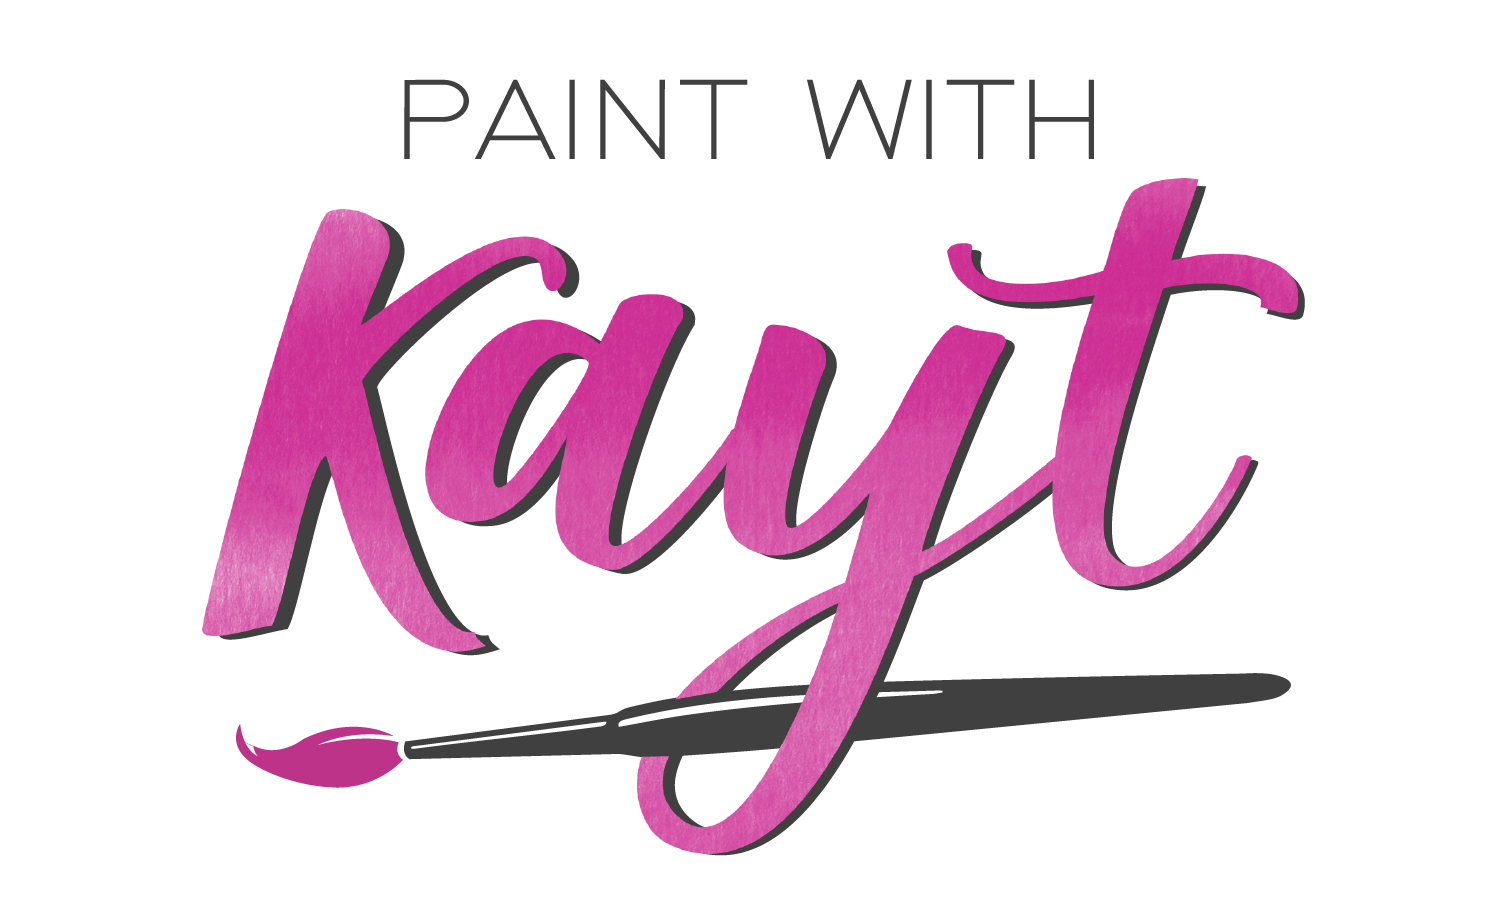 Paint with Kayt